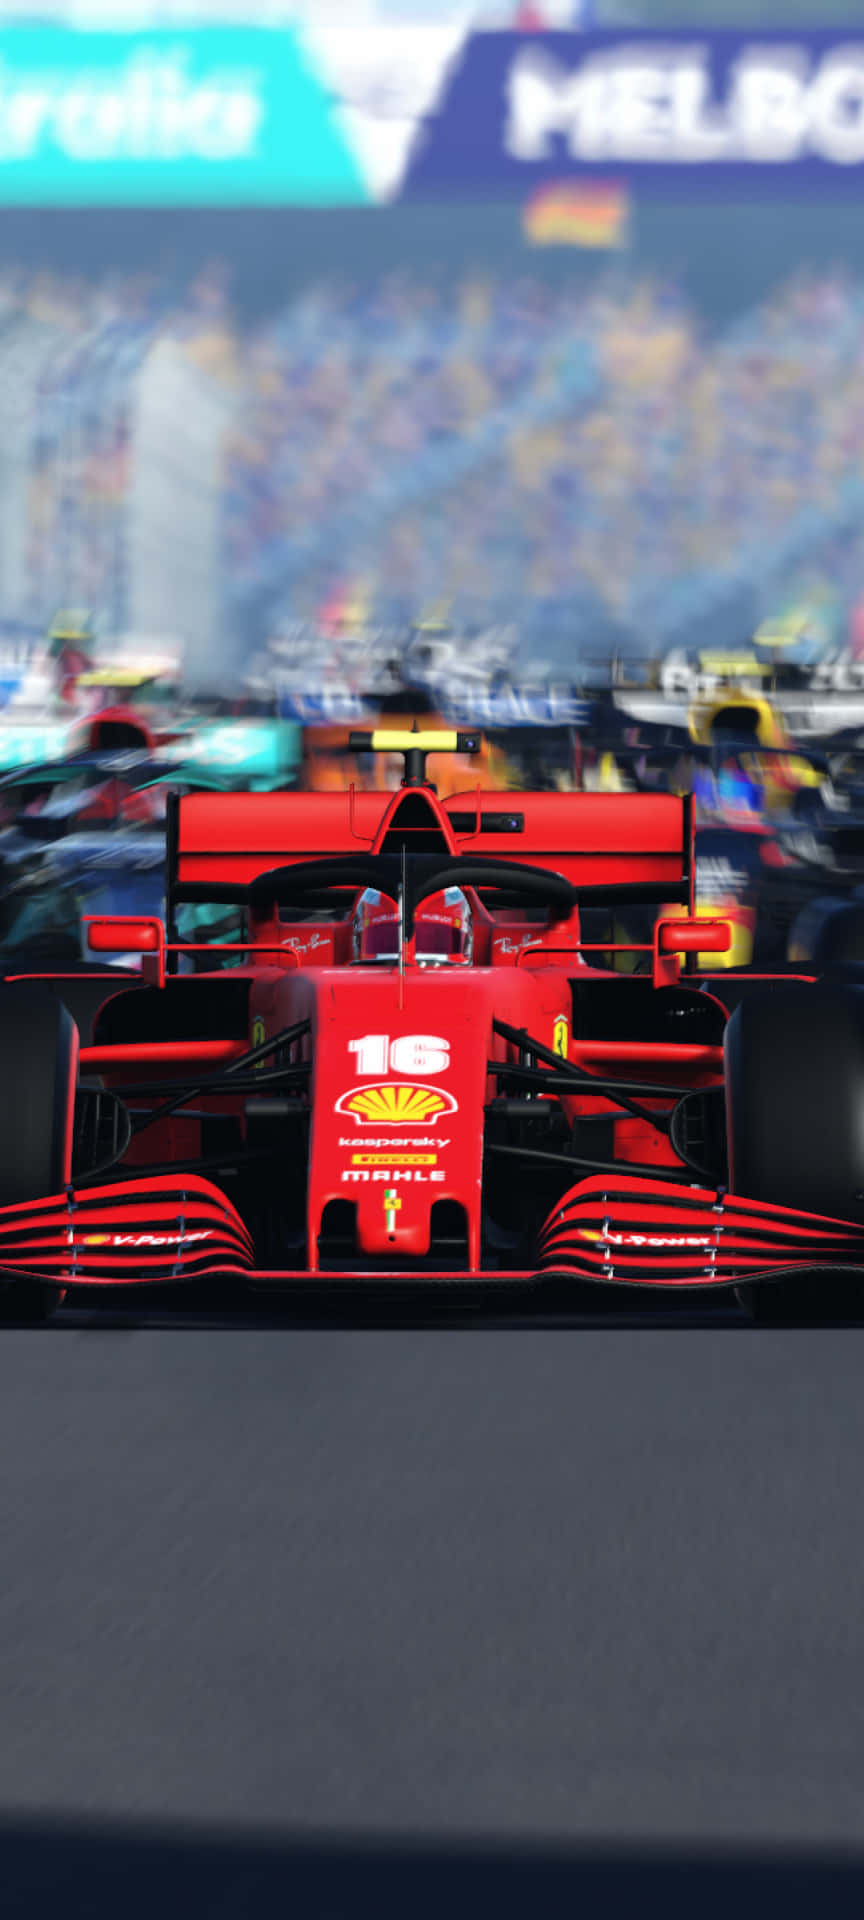 Feel the rush of Formula 1 with this custom iPhone Wallpaper